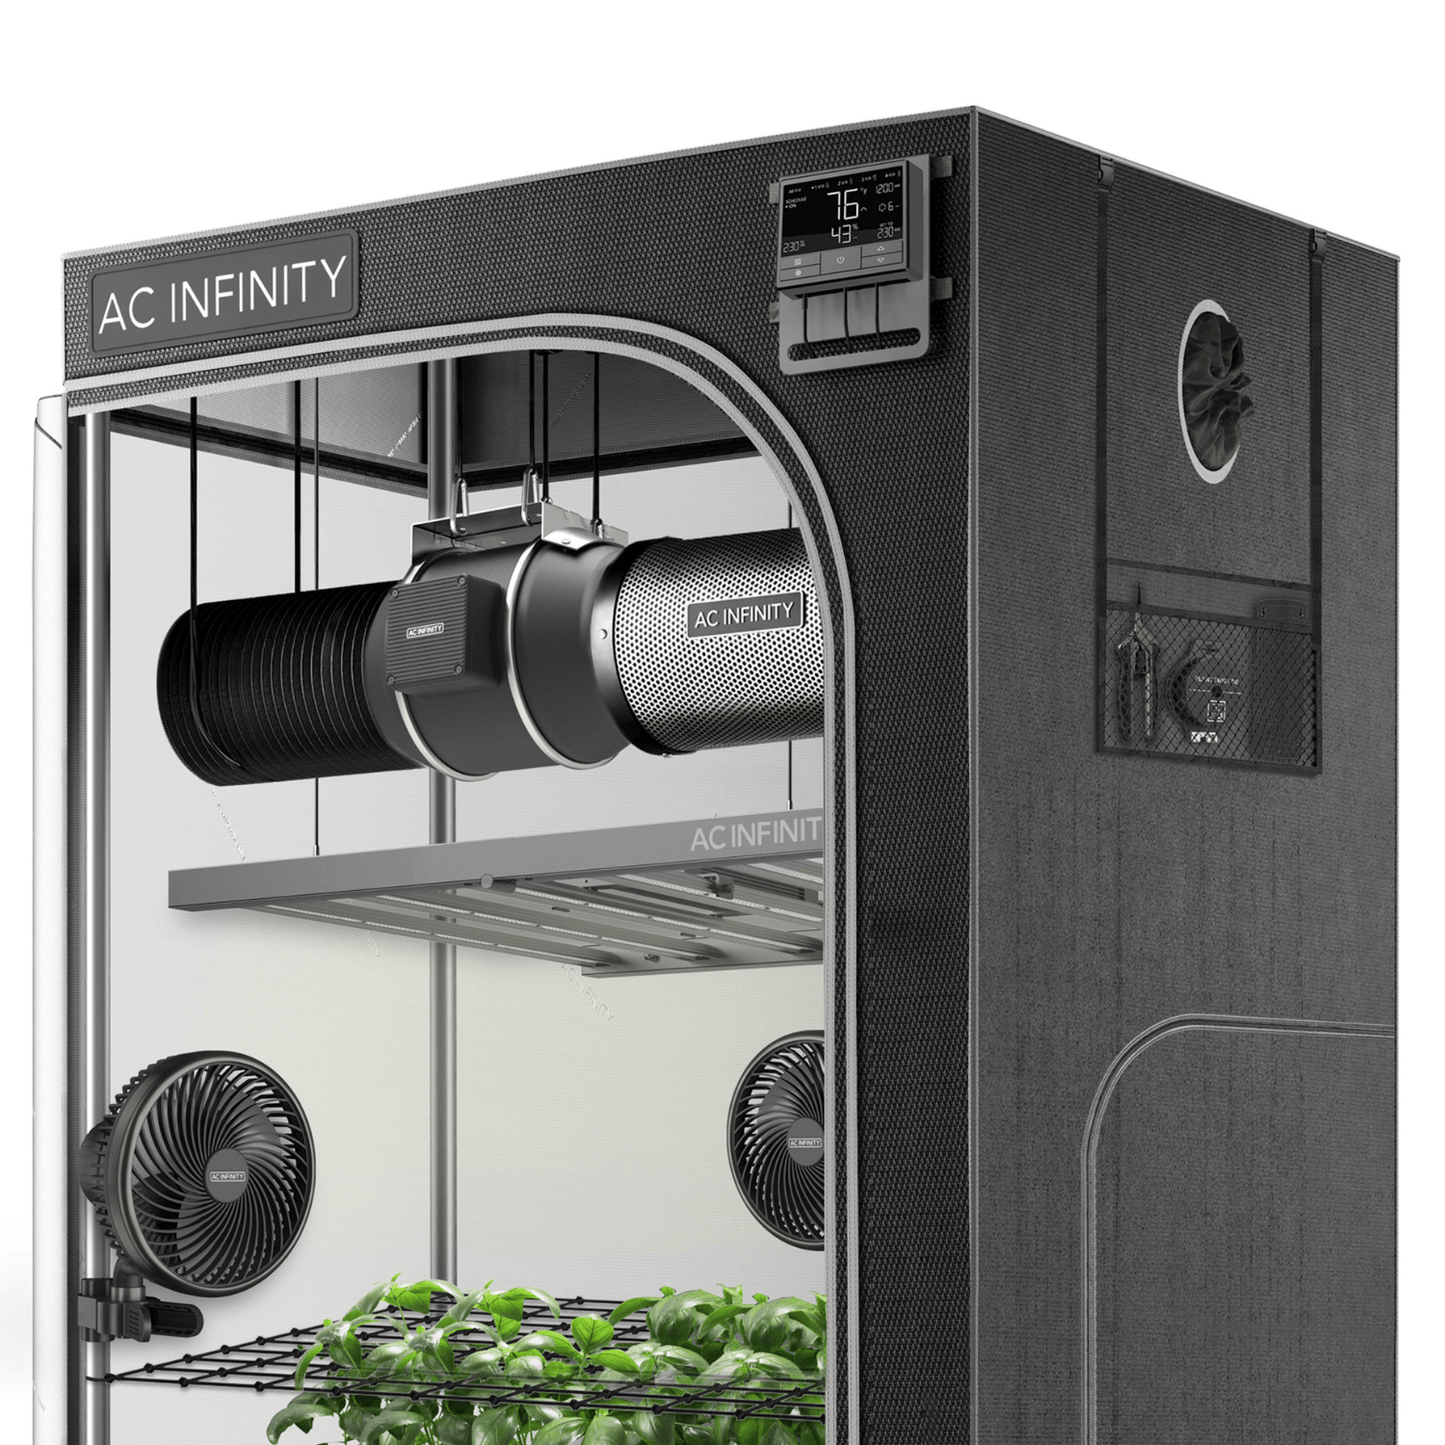 AC Infinity Advance Grow Tent System Pro 5x5, 6-Plant Kit, WiFi-Integrated Controls to Automate Ventilation, Circulation, Full Spectrum LM301H EVO LED Grow Light AC-PKB55 Kits 819137024038